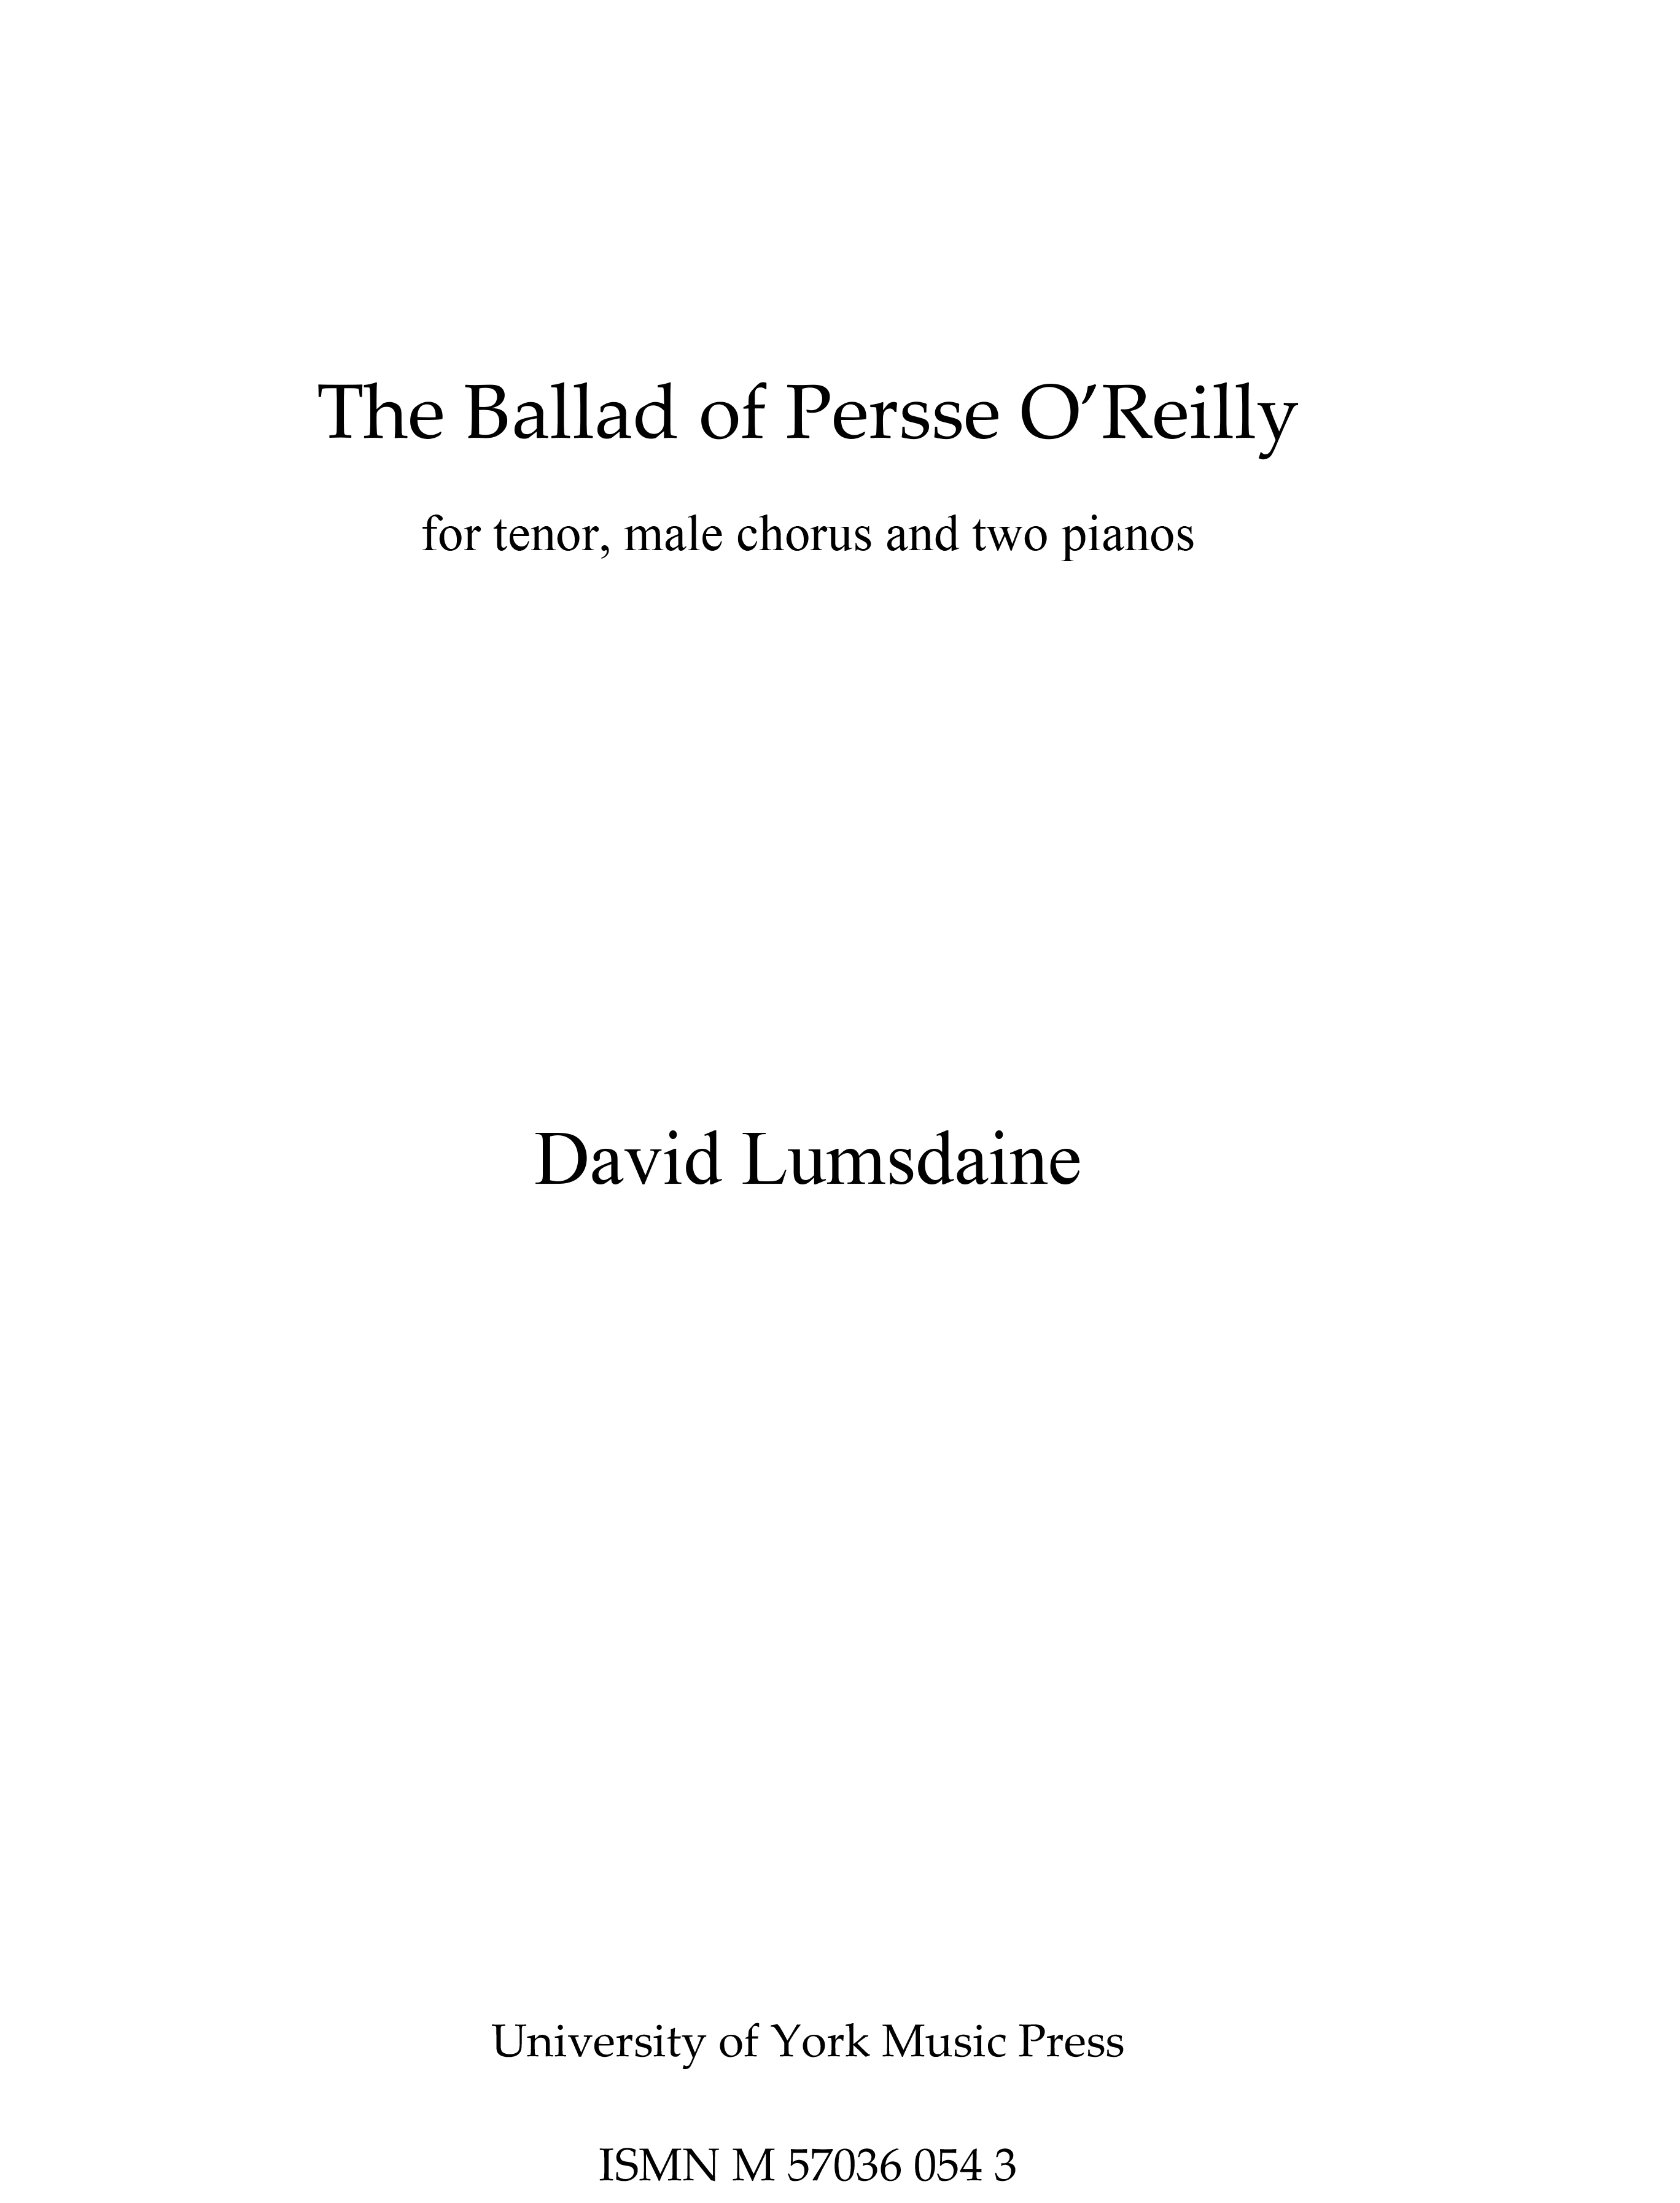 David Lumsdaine: The Ballad Of Persse O'Reilly